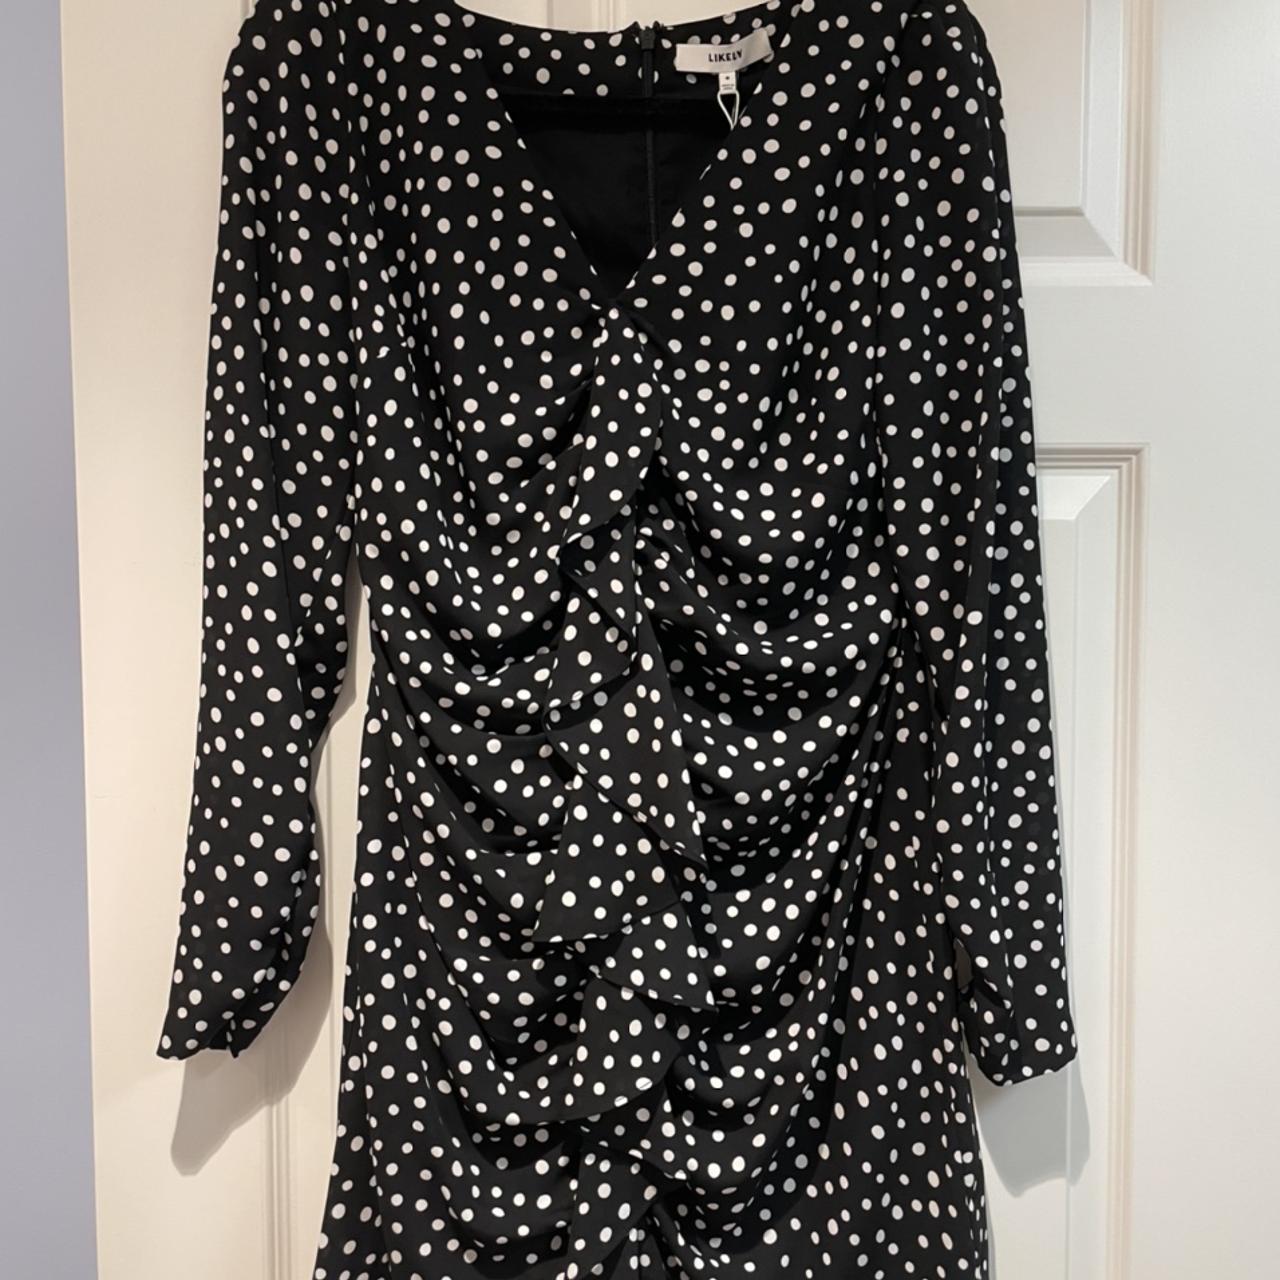 LIKELY Women's Black and White Dress